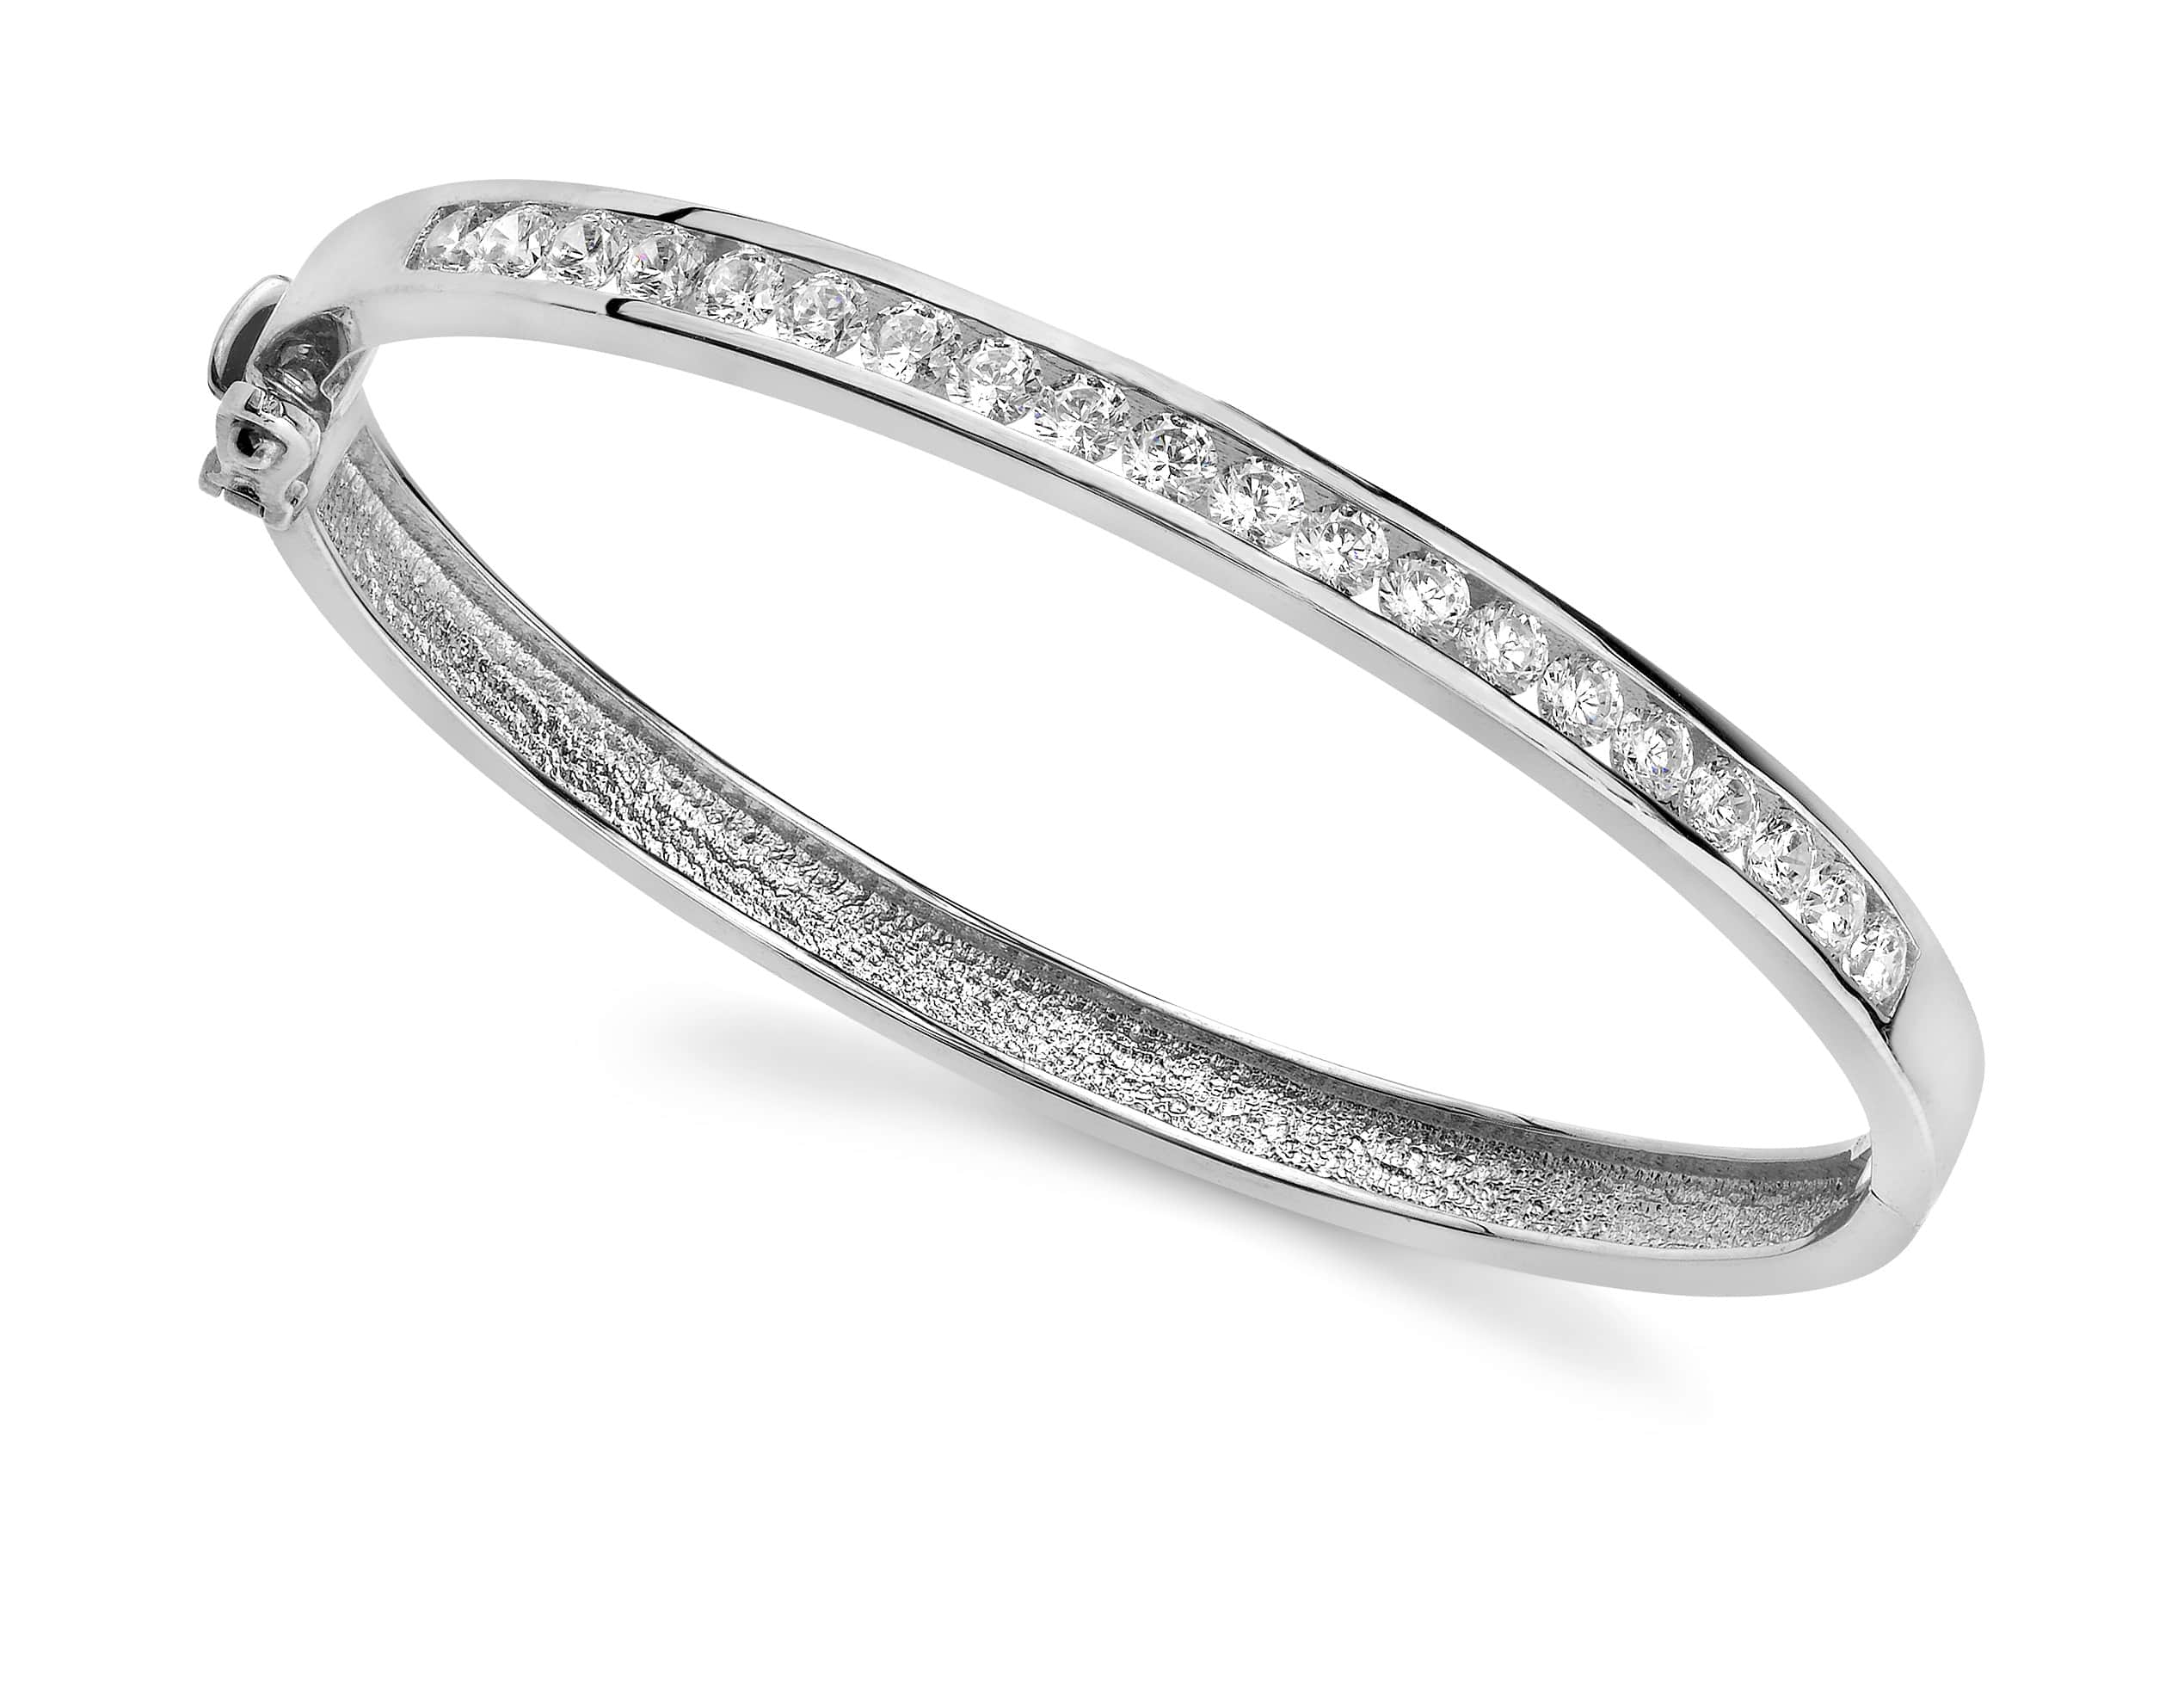 Channel Set Diamond Bangle Available In Platinum Or Gold